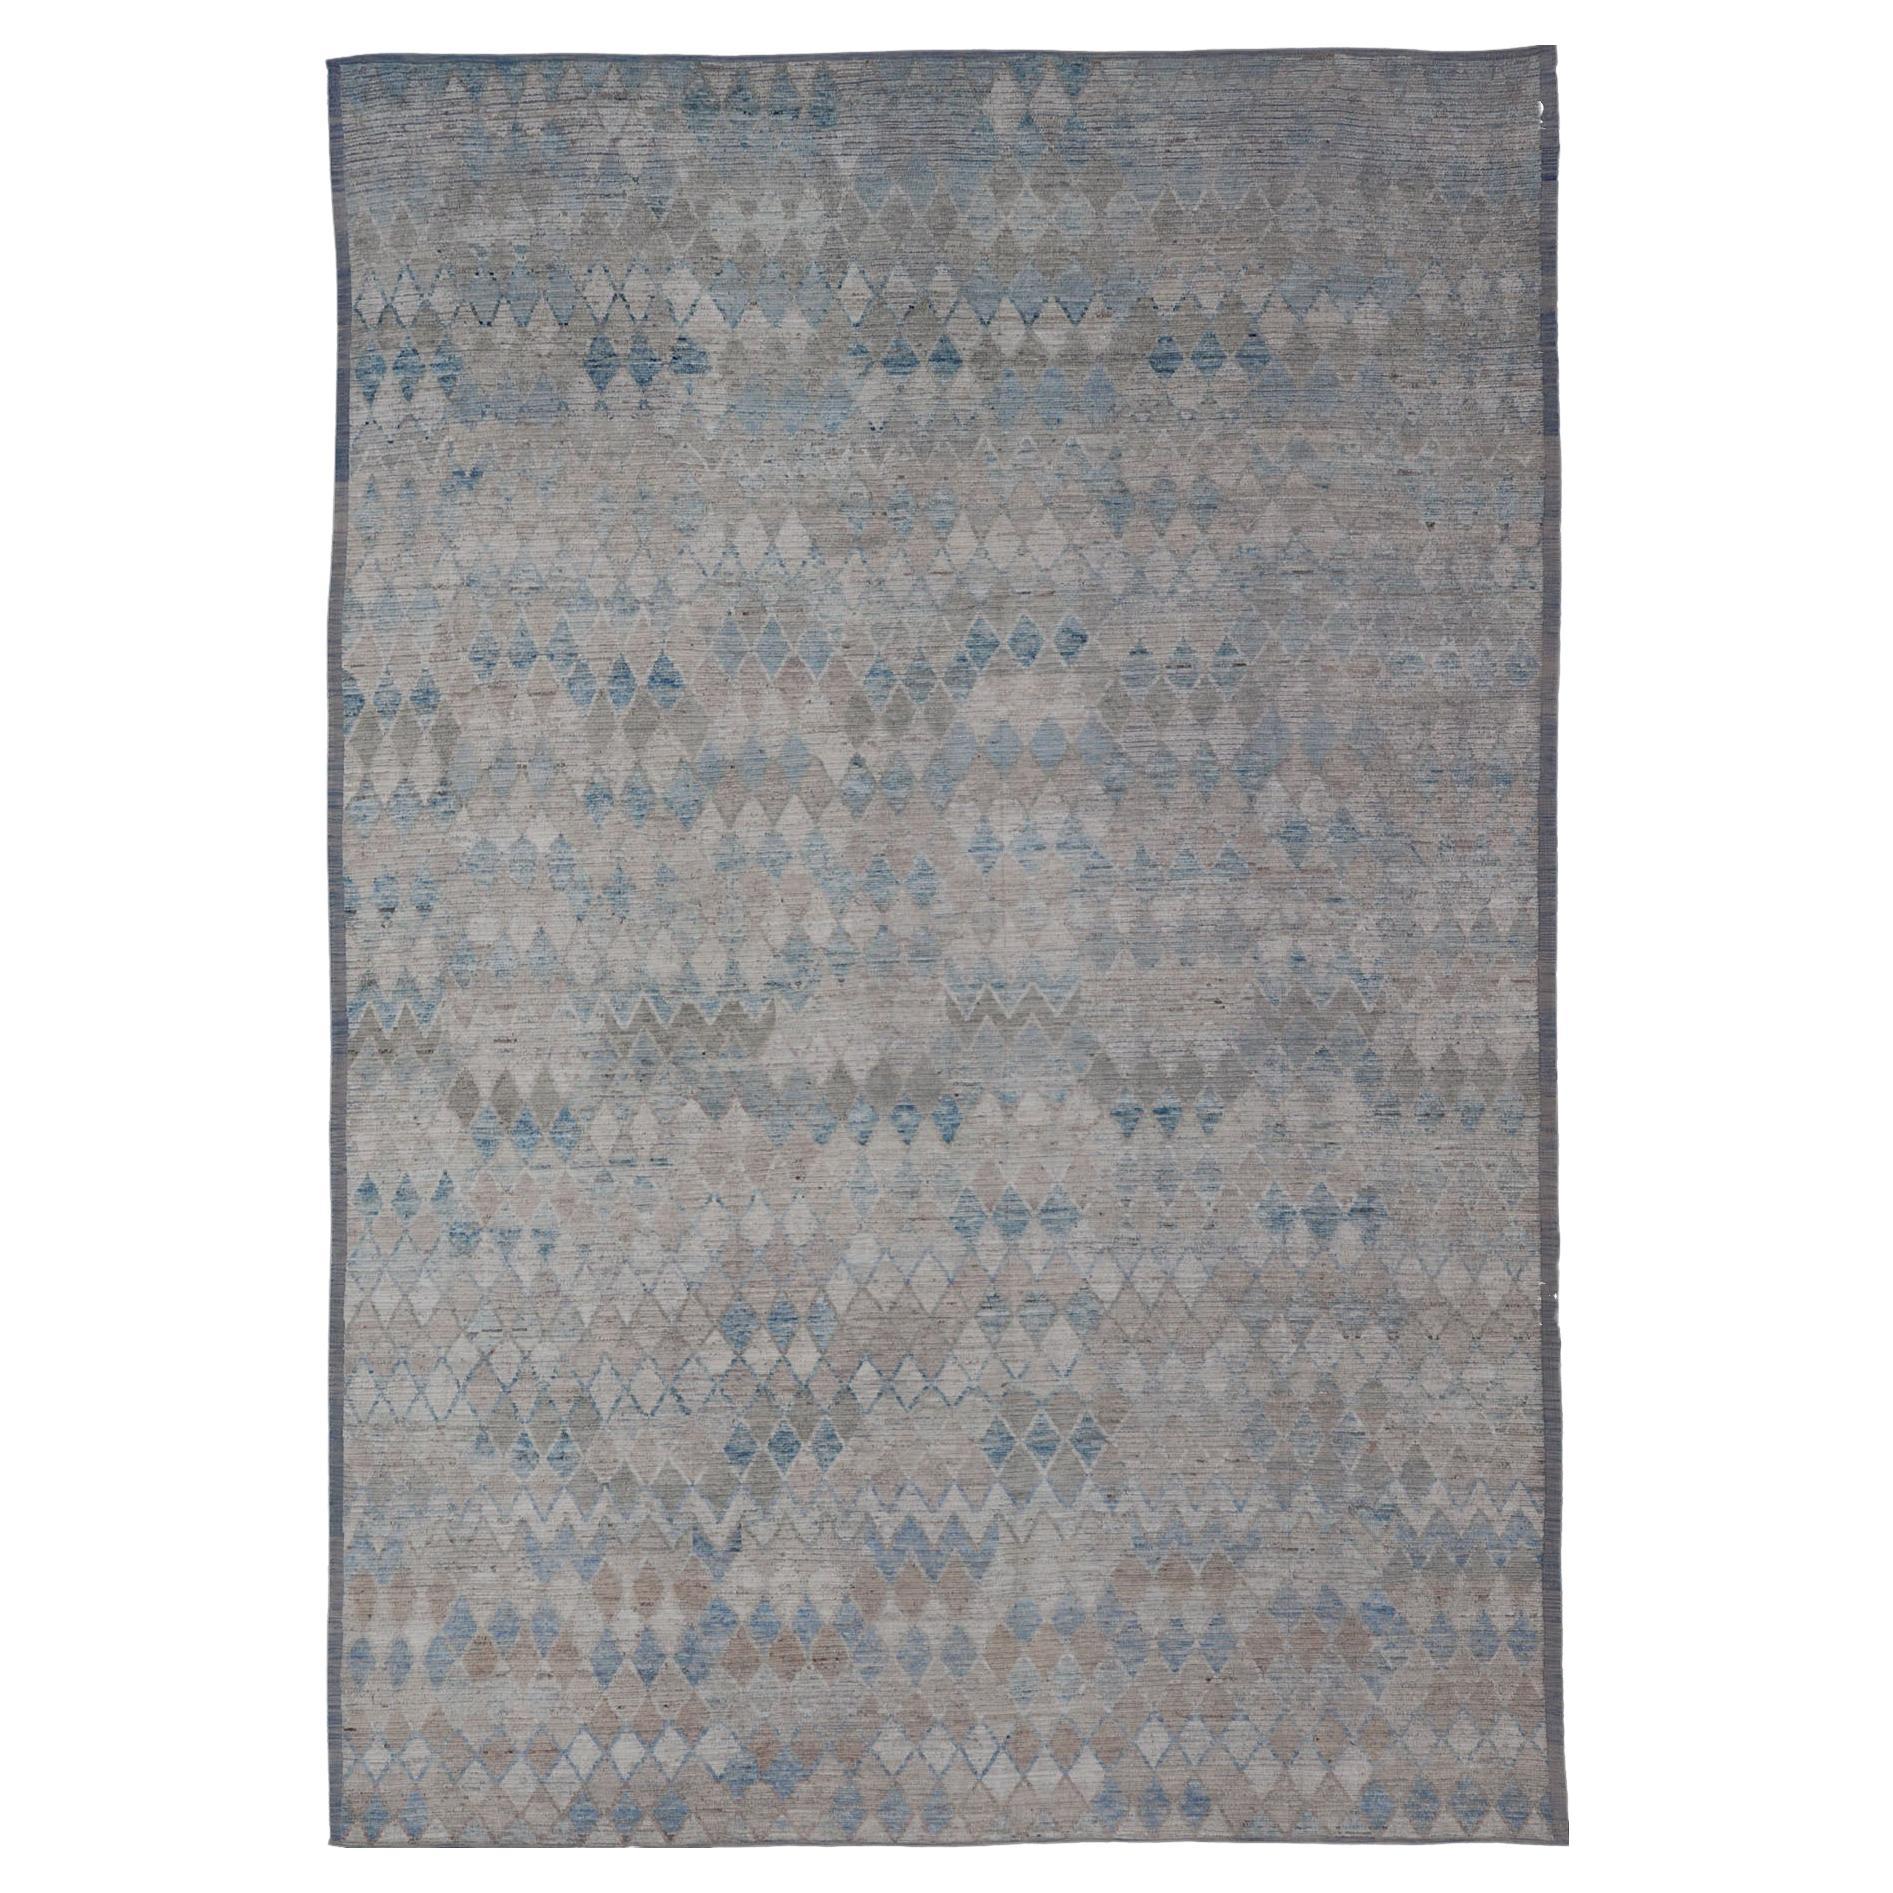 Oversized Modern Casual All-Over Diamond Design in Blue, Taupe, and Cream